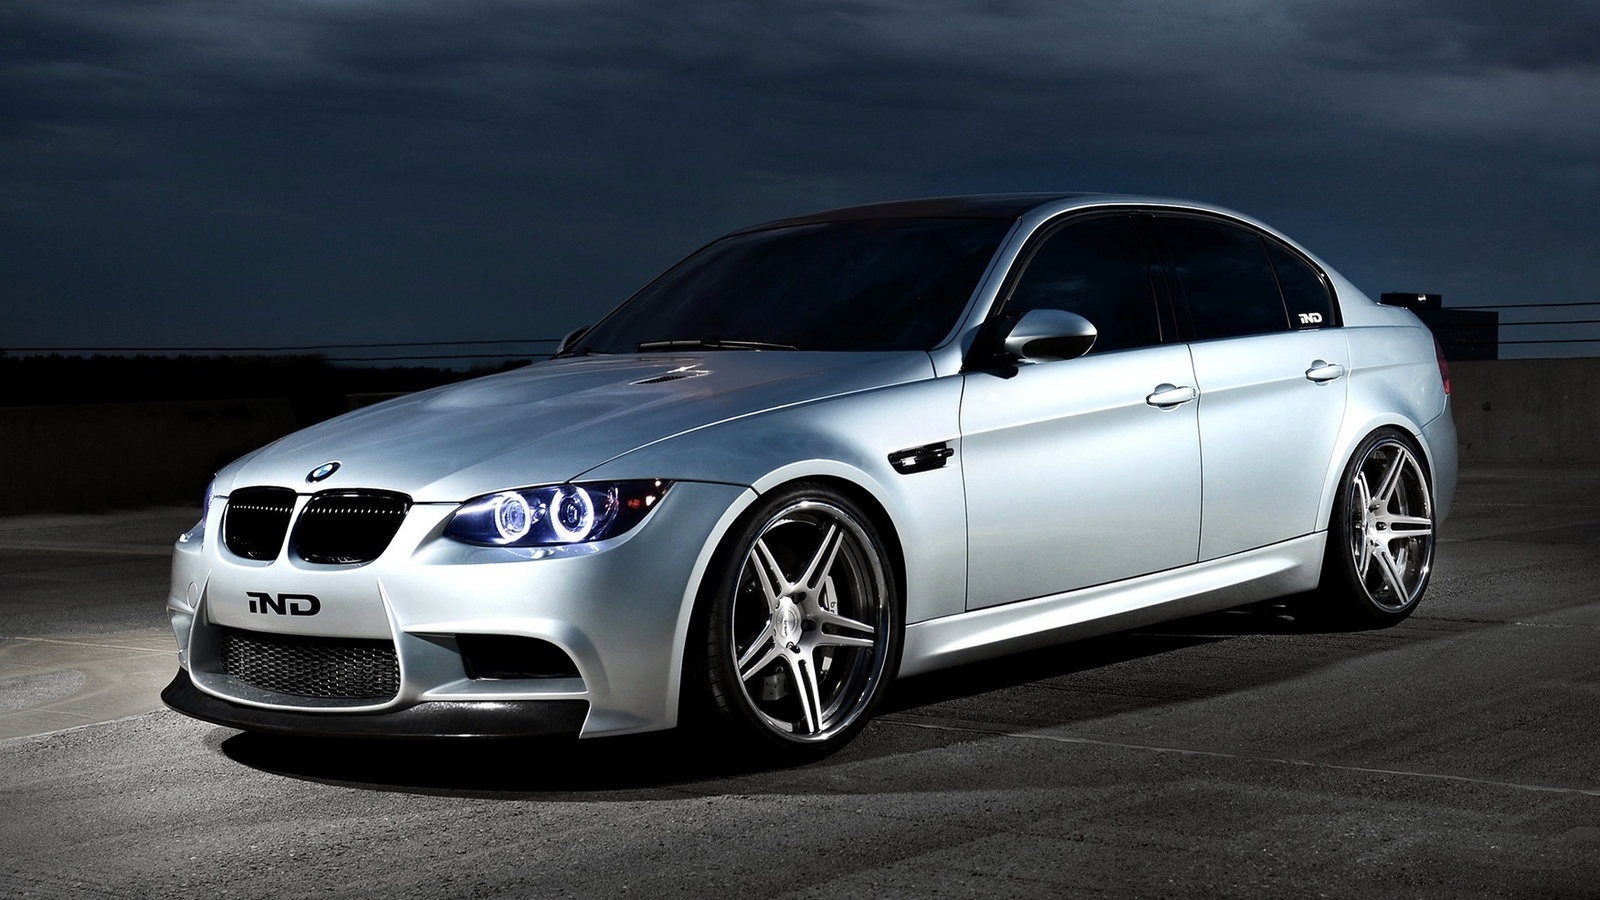 wallpapers, sedan, automobile, ghost, ind, angel eyes, 2012, tuning, e90, silver, Car, bmw m3